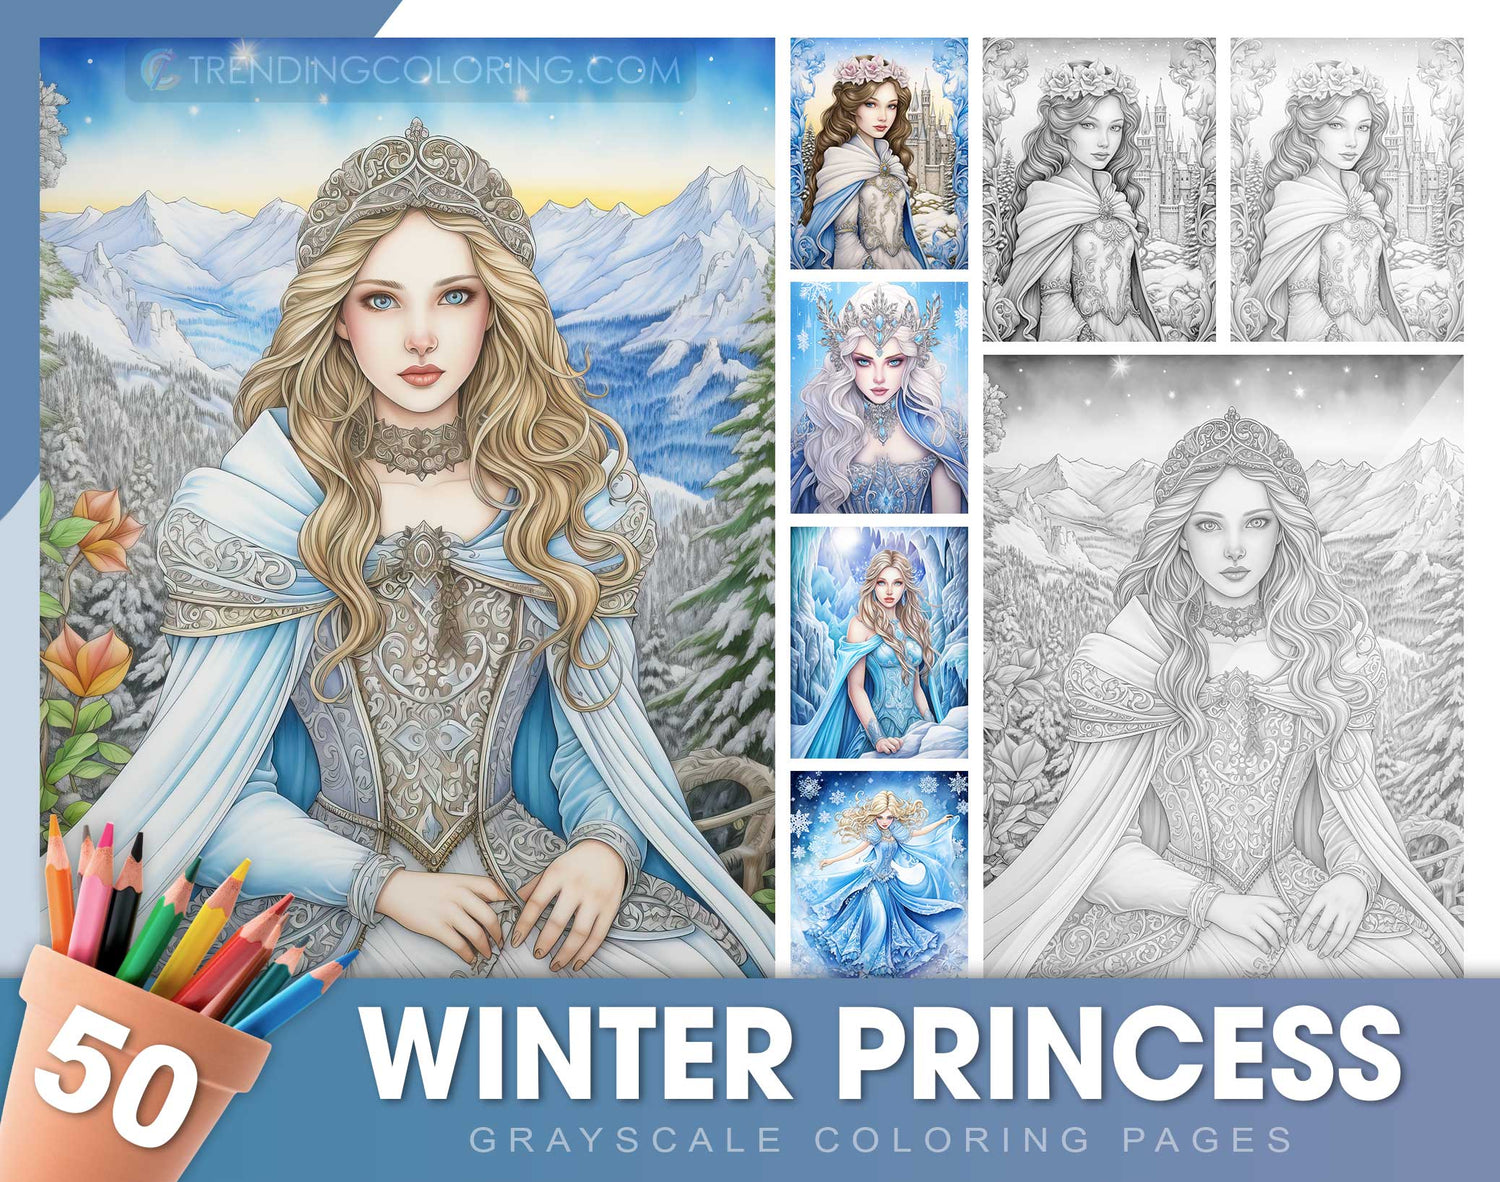 50 Winter Princesses Grayscale Coloring Pages - Instant Download - Printable Dark/Light PDF